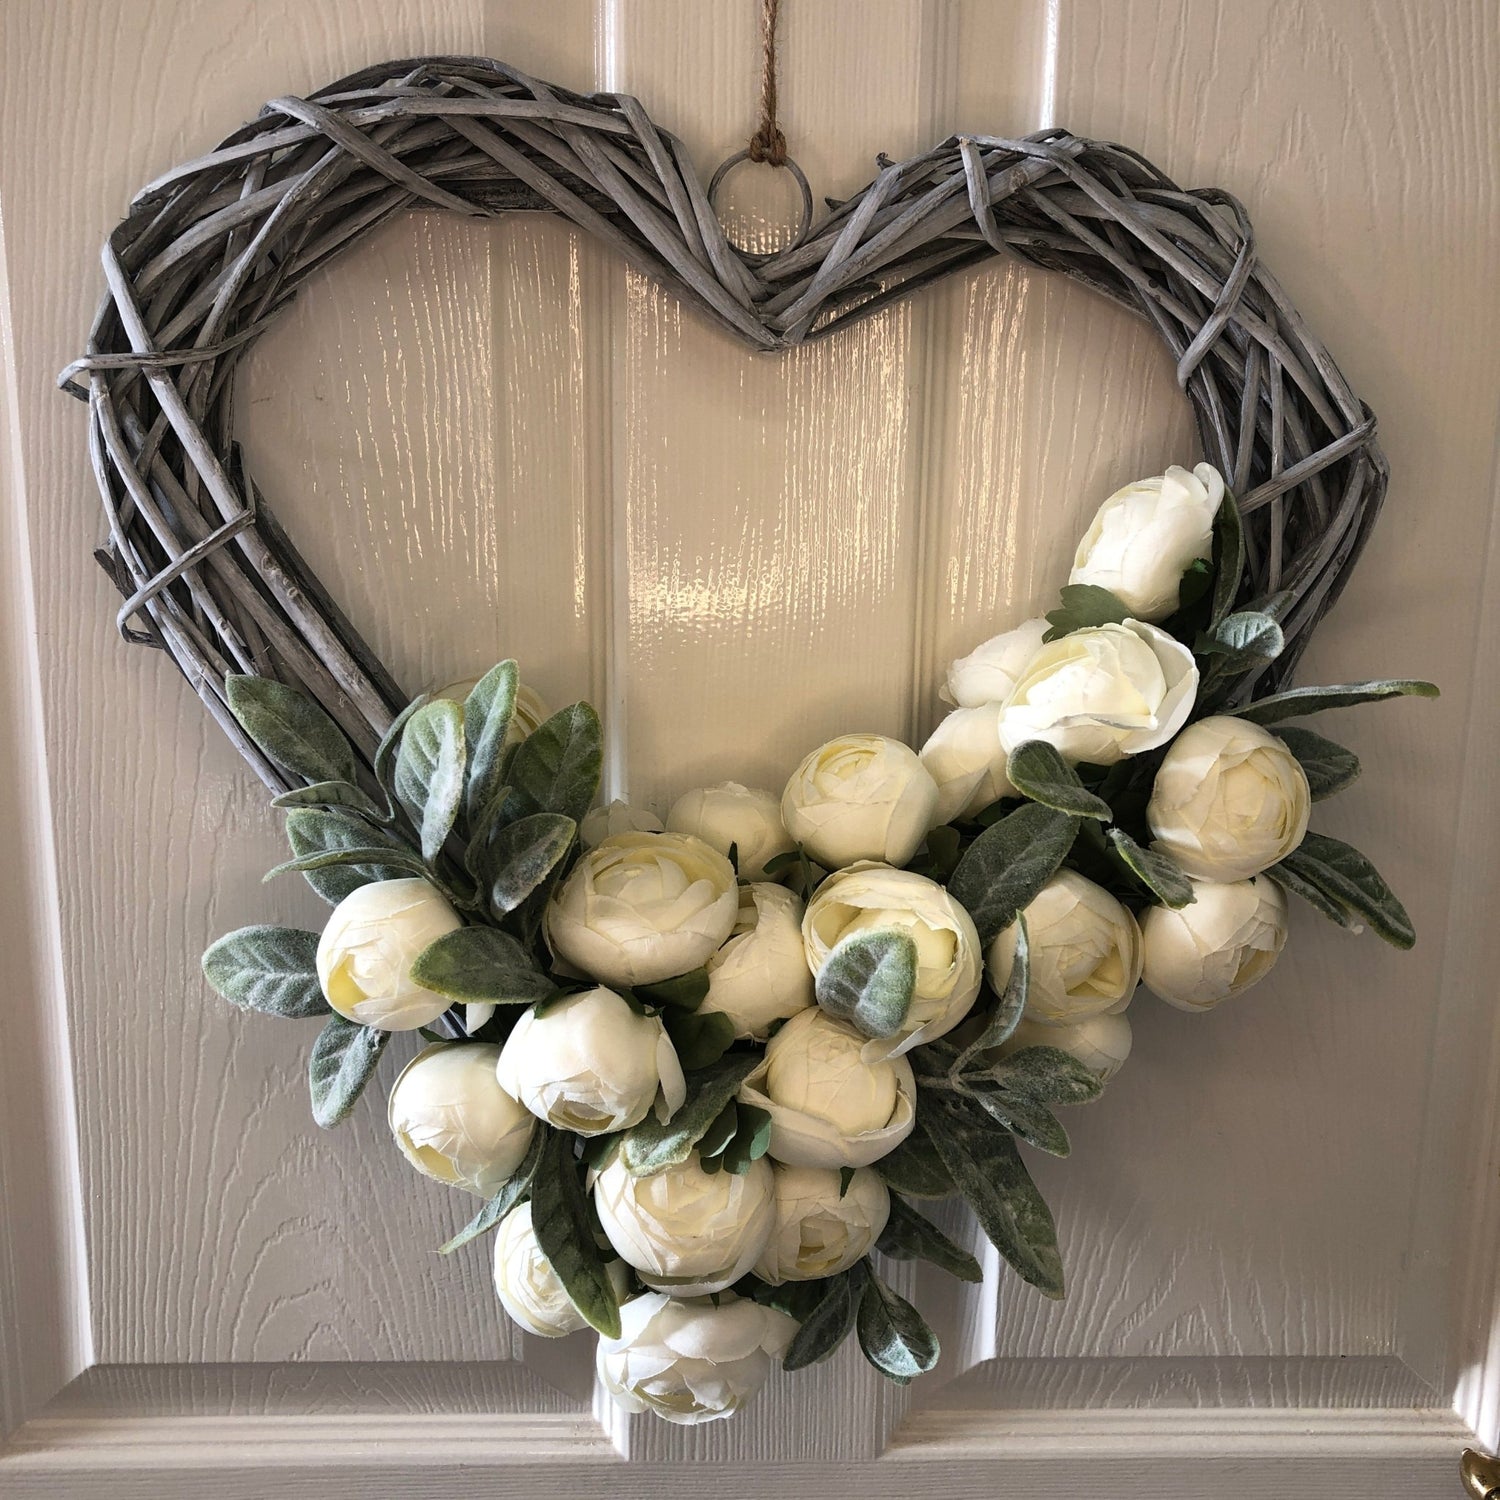 Grey willow wreath with white peony buds and lambs ear. - floralwishes